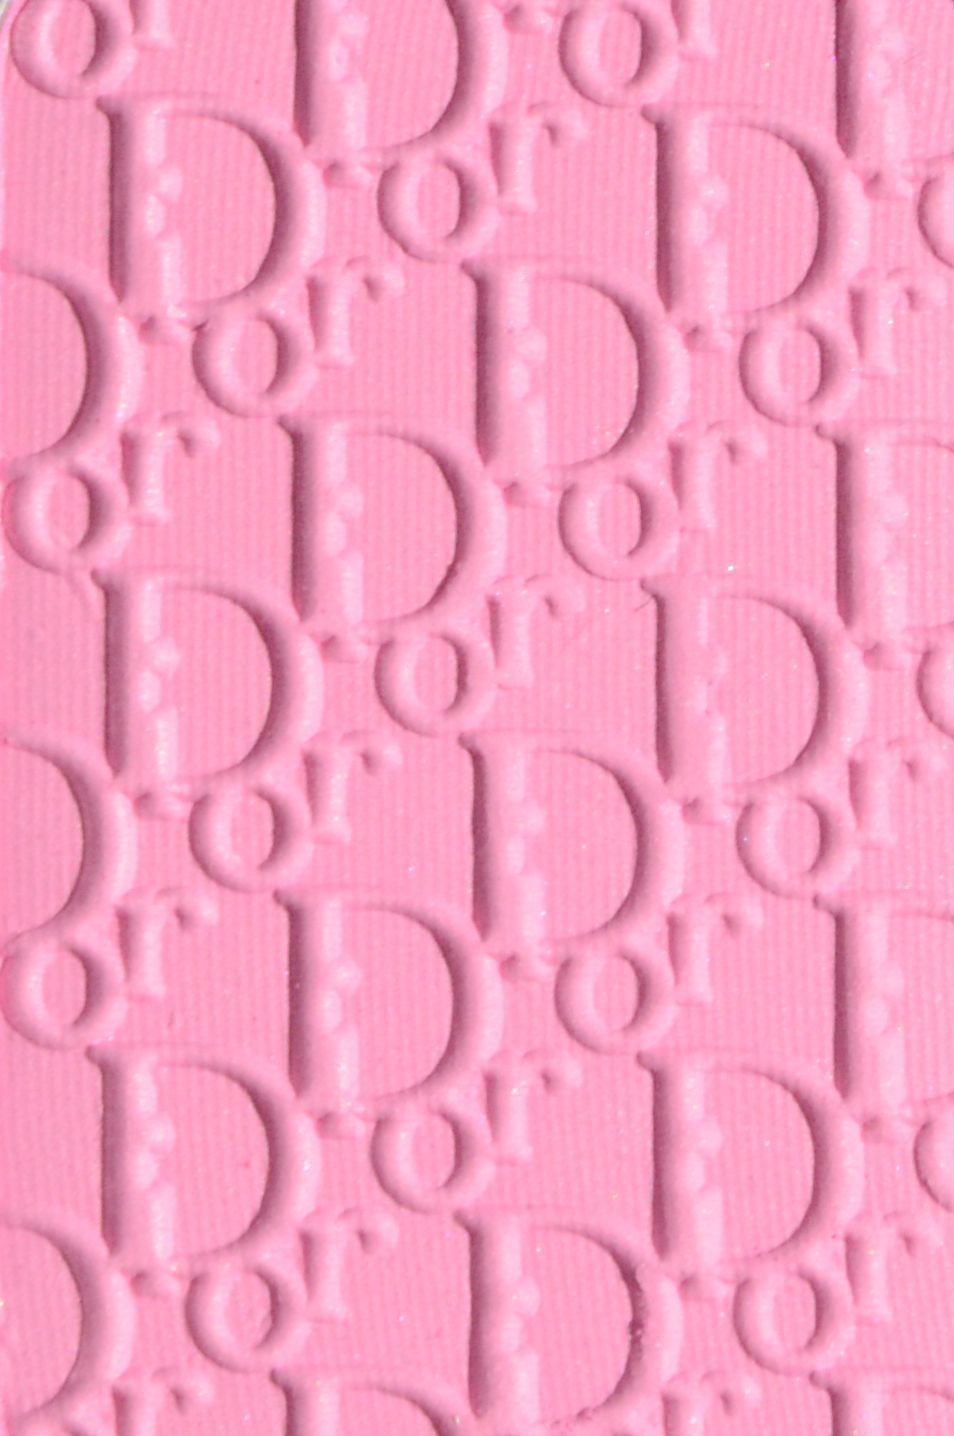 A close up of the Christian Dior logo embossed on a pink background - Dior